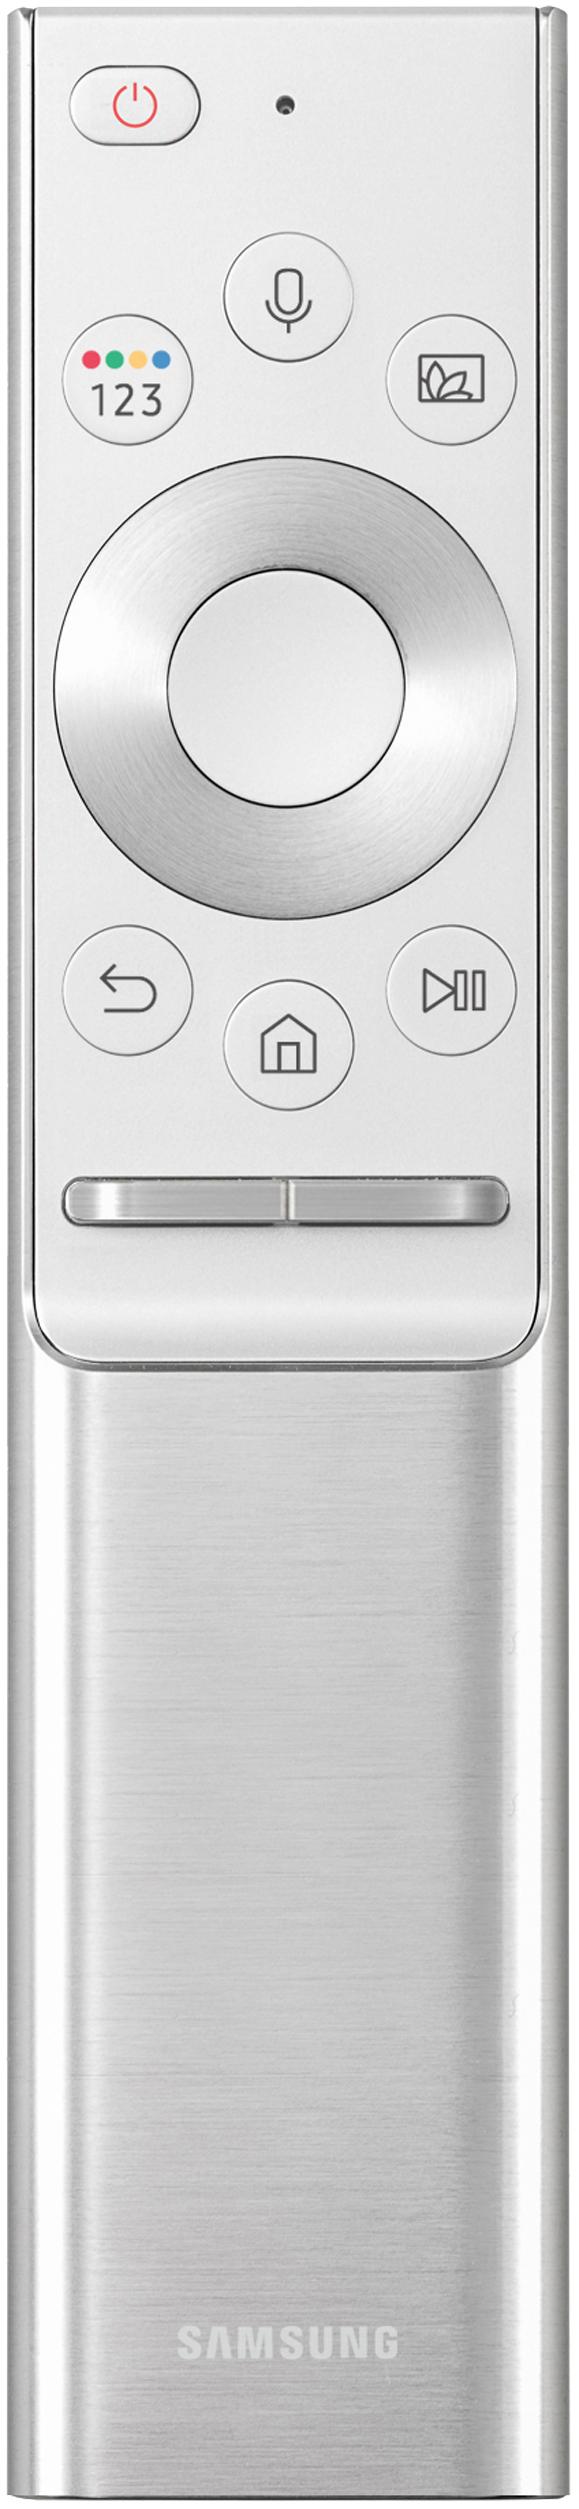 If the Samsung Smart Remote does not pair to the TV automatically, point it at the remote control sensor of the TV,